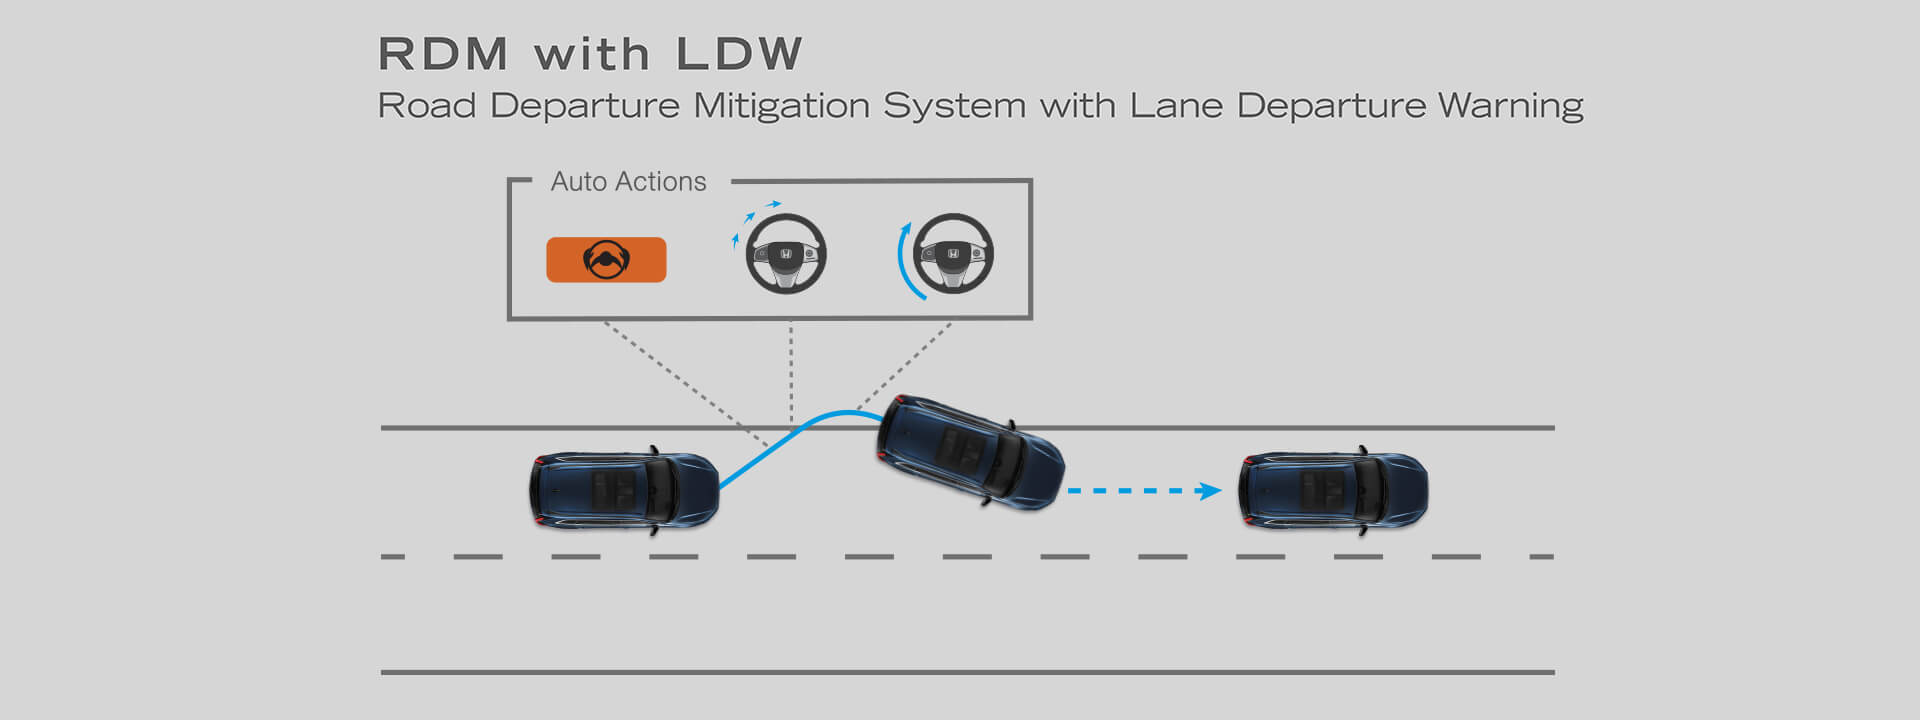 Road Departure Mitigation System with Departure Warning : RDM with LDW